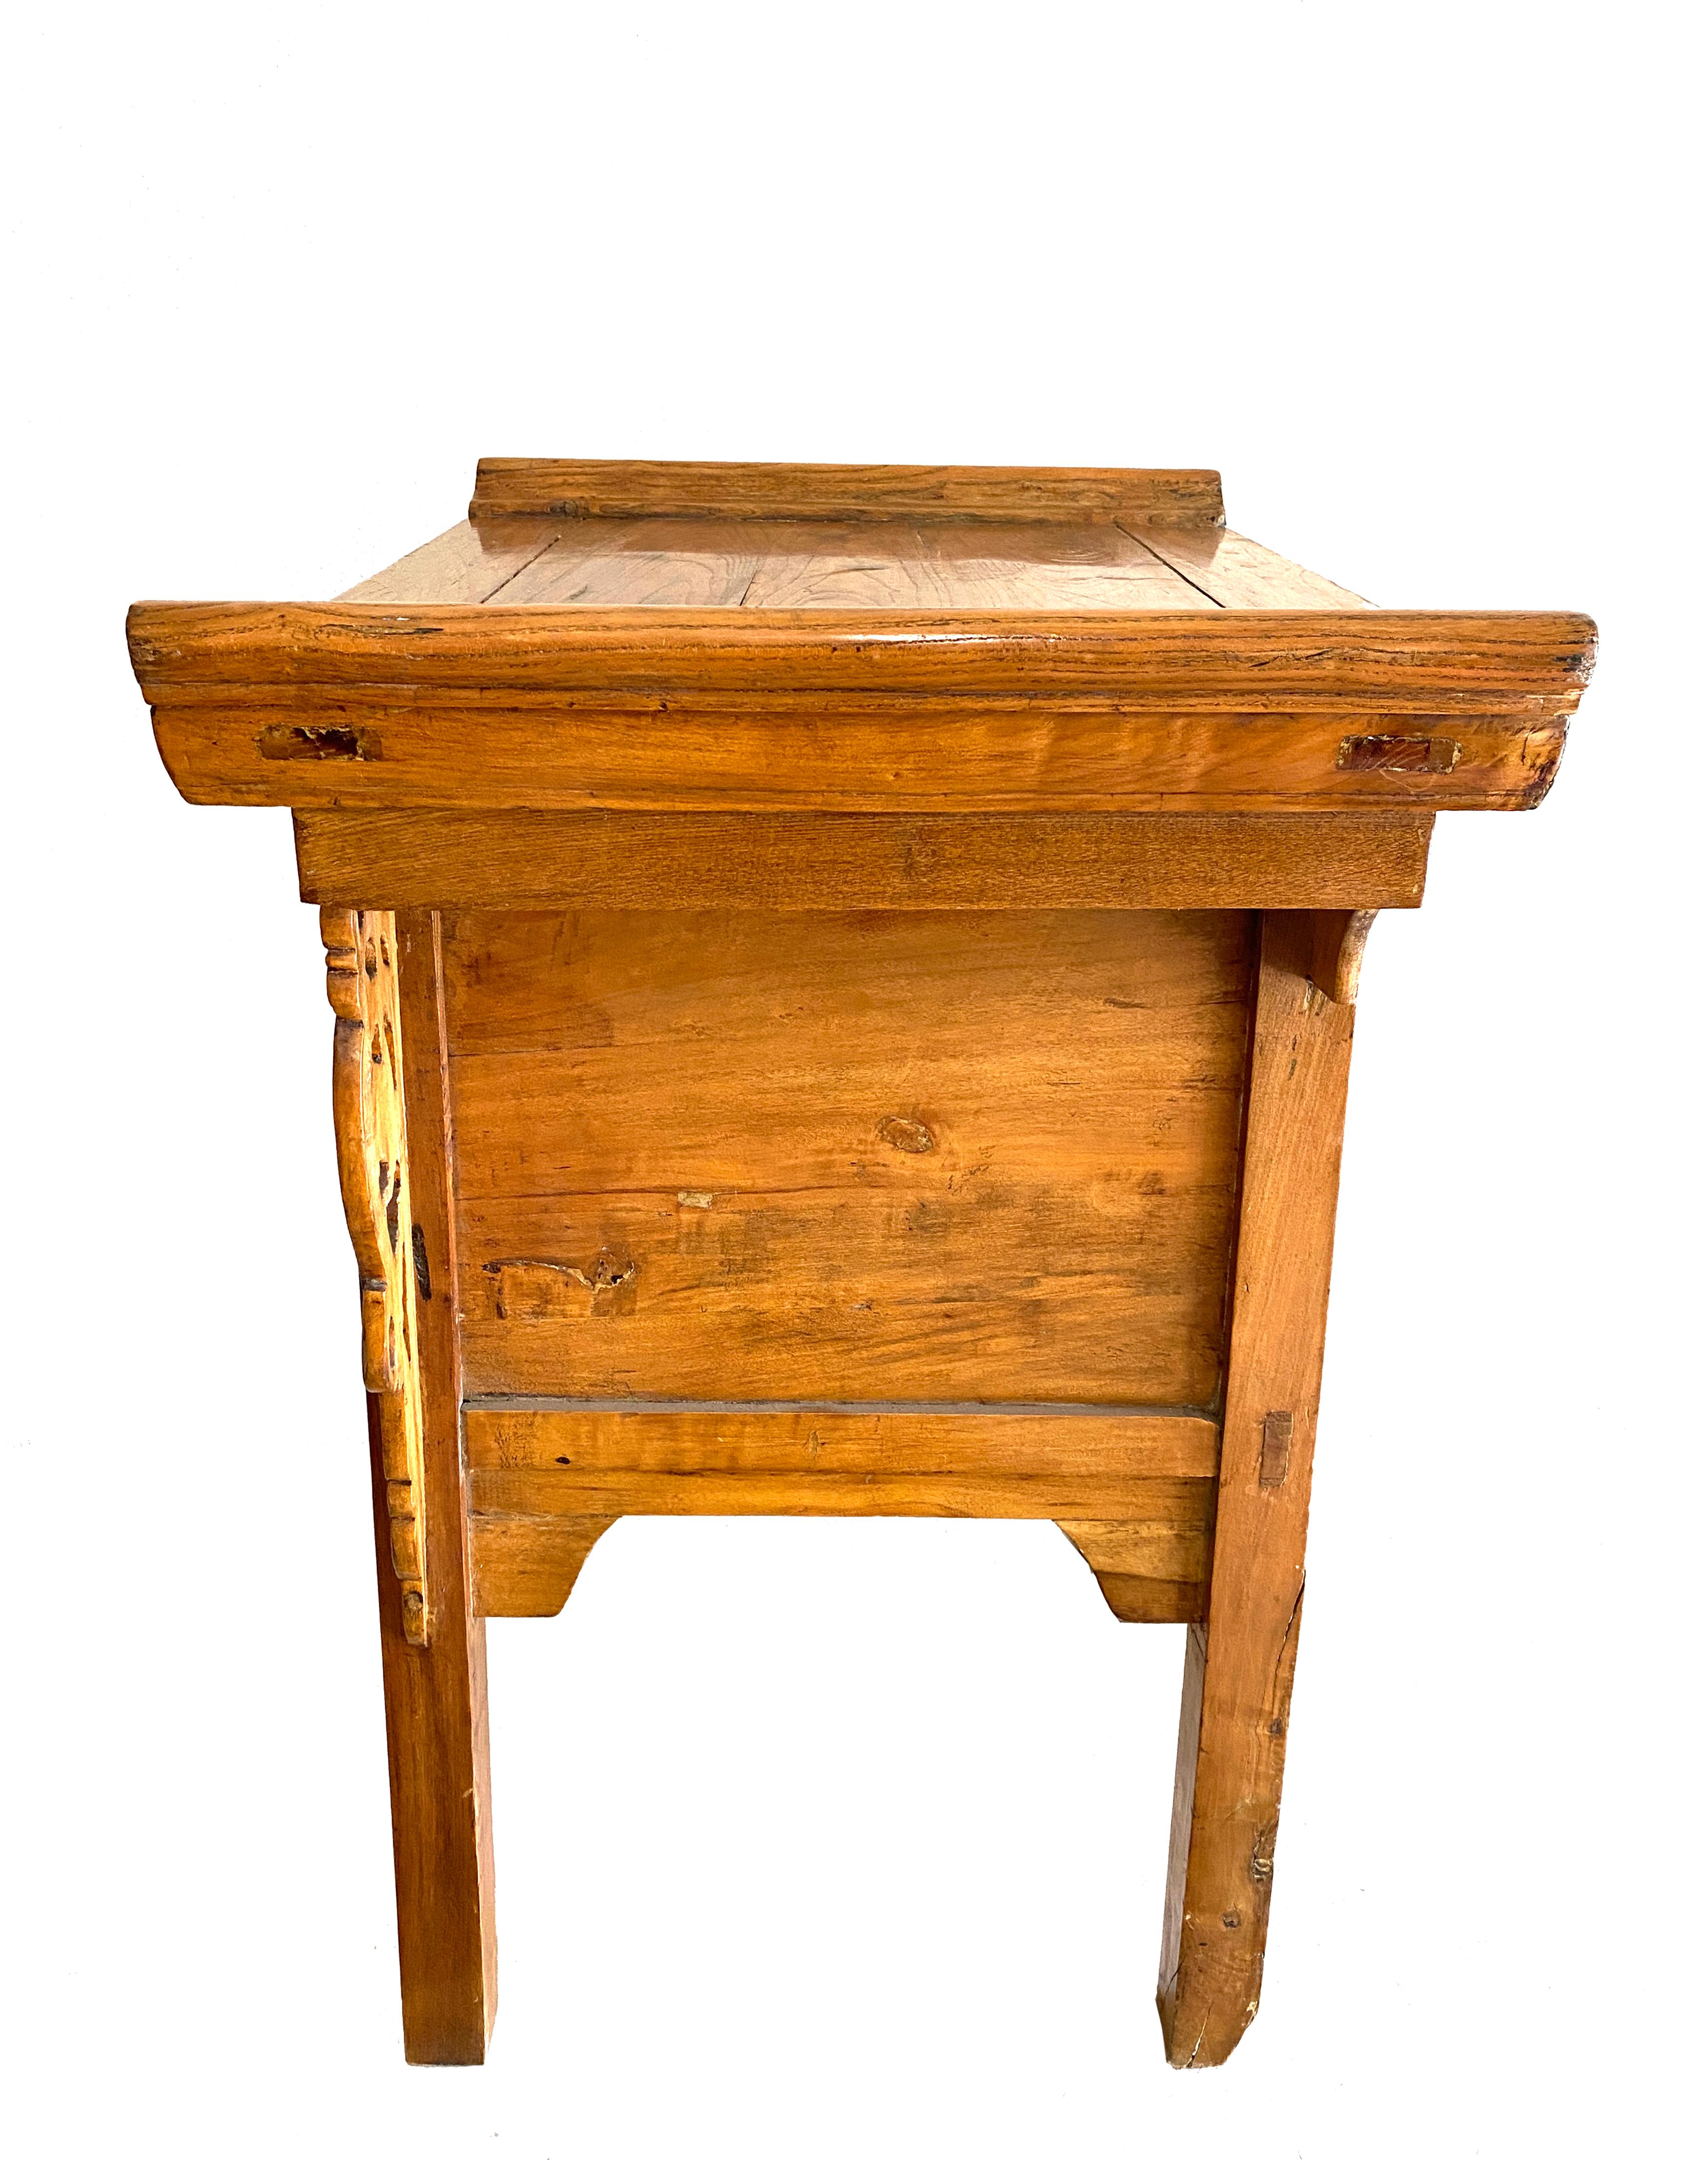 Antique Chinese Beech Hardwood Single Drawer Carved Coffer Table In Good Condition For Sale In Danville, CA